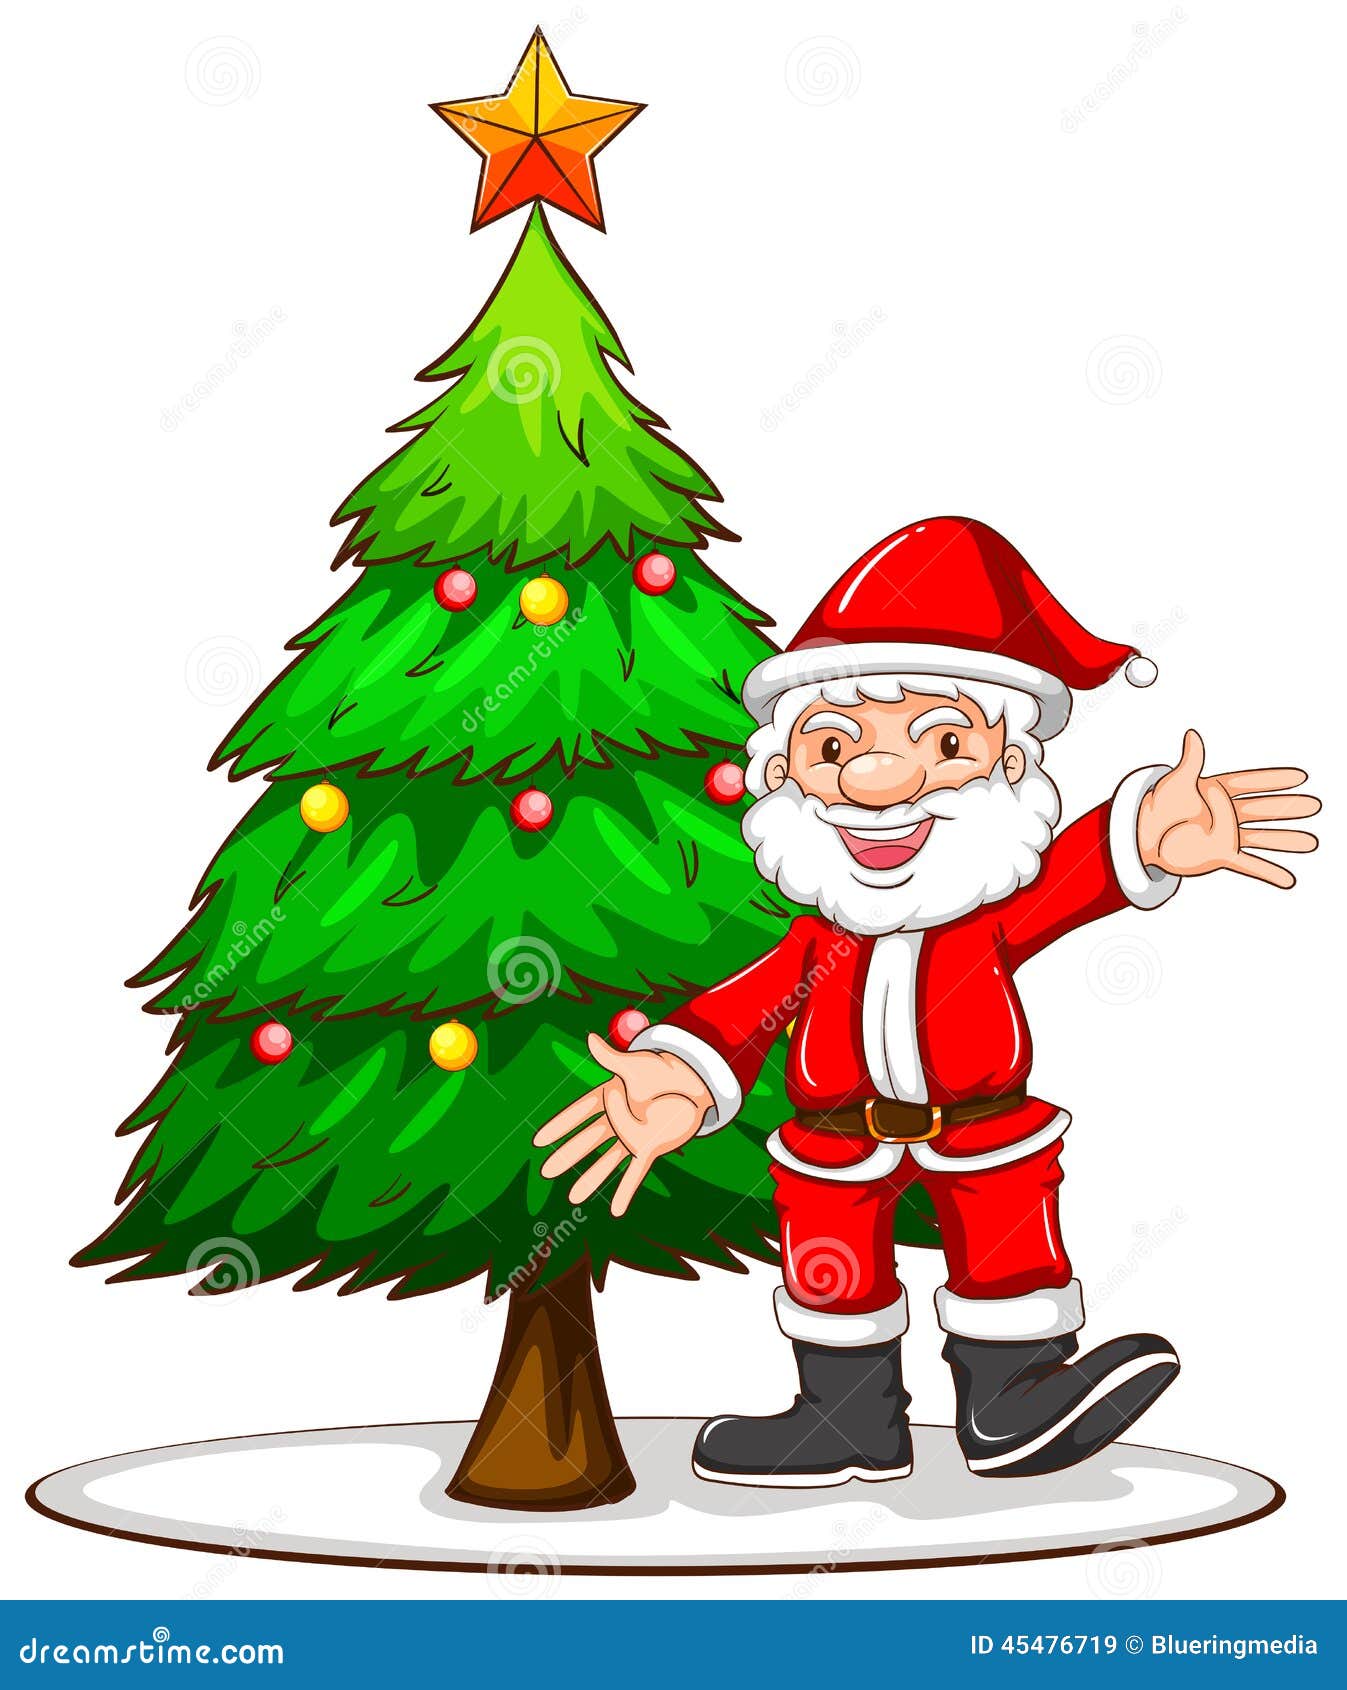 A Sketch Of A Christmas Tree With Santa Claus Stock Vector